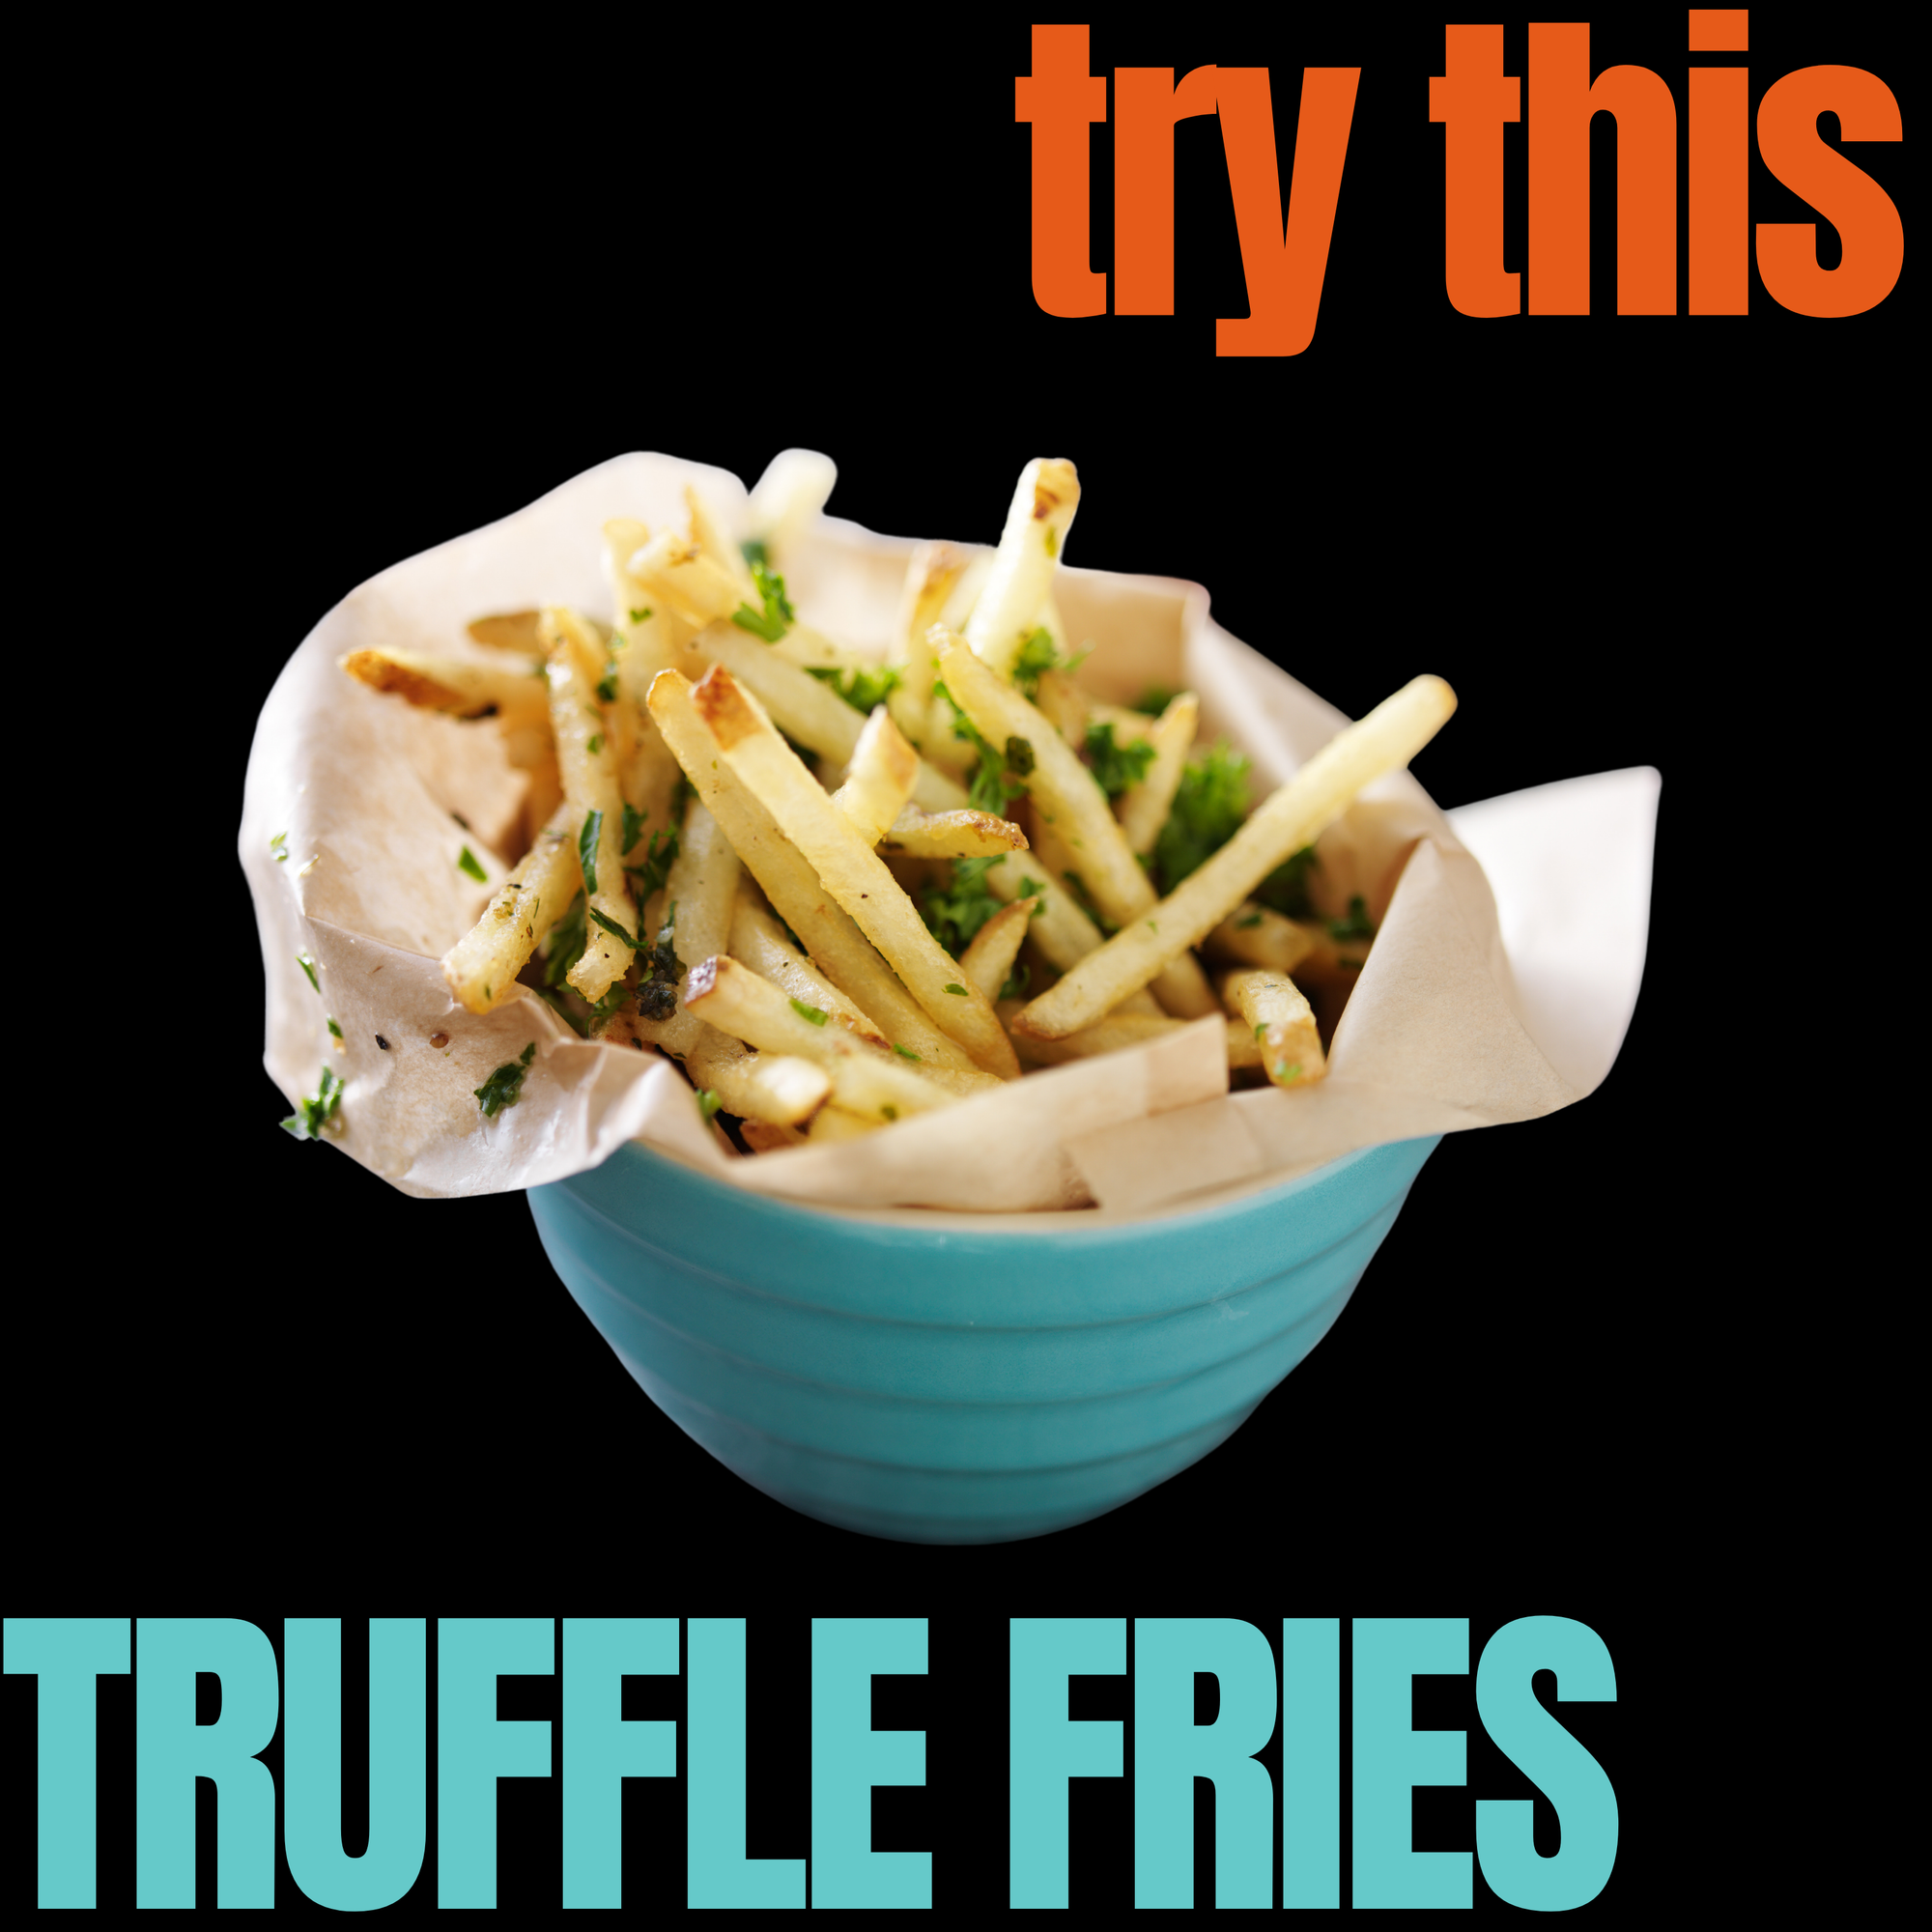 TRY THIS - TRUFFLE FRIES